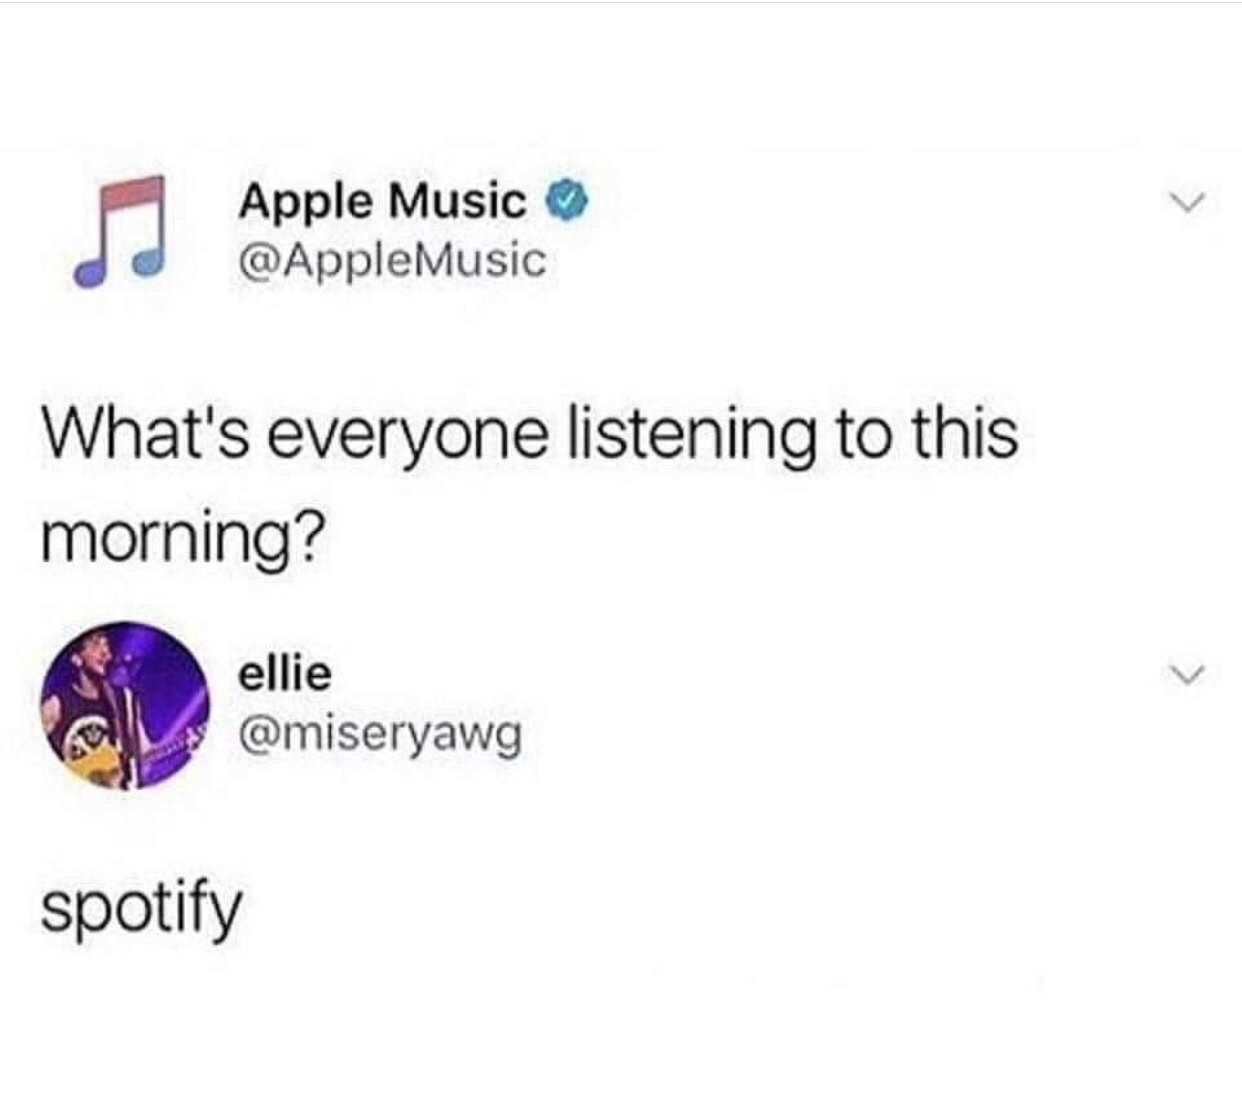 meme apple music spotify tweet - Apple Music Music What's everyone listening to this morning? ellie spotify